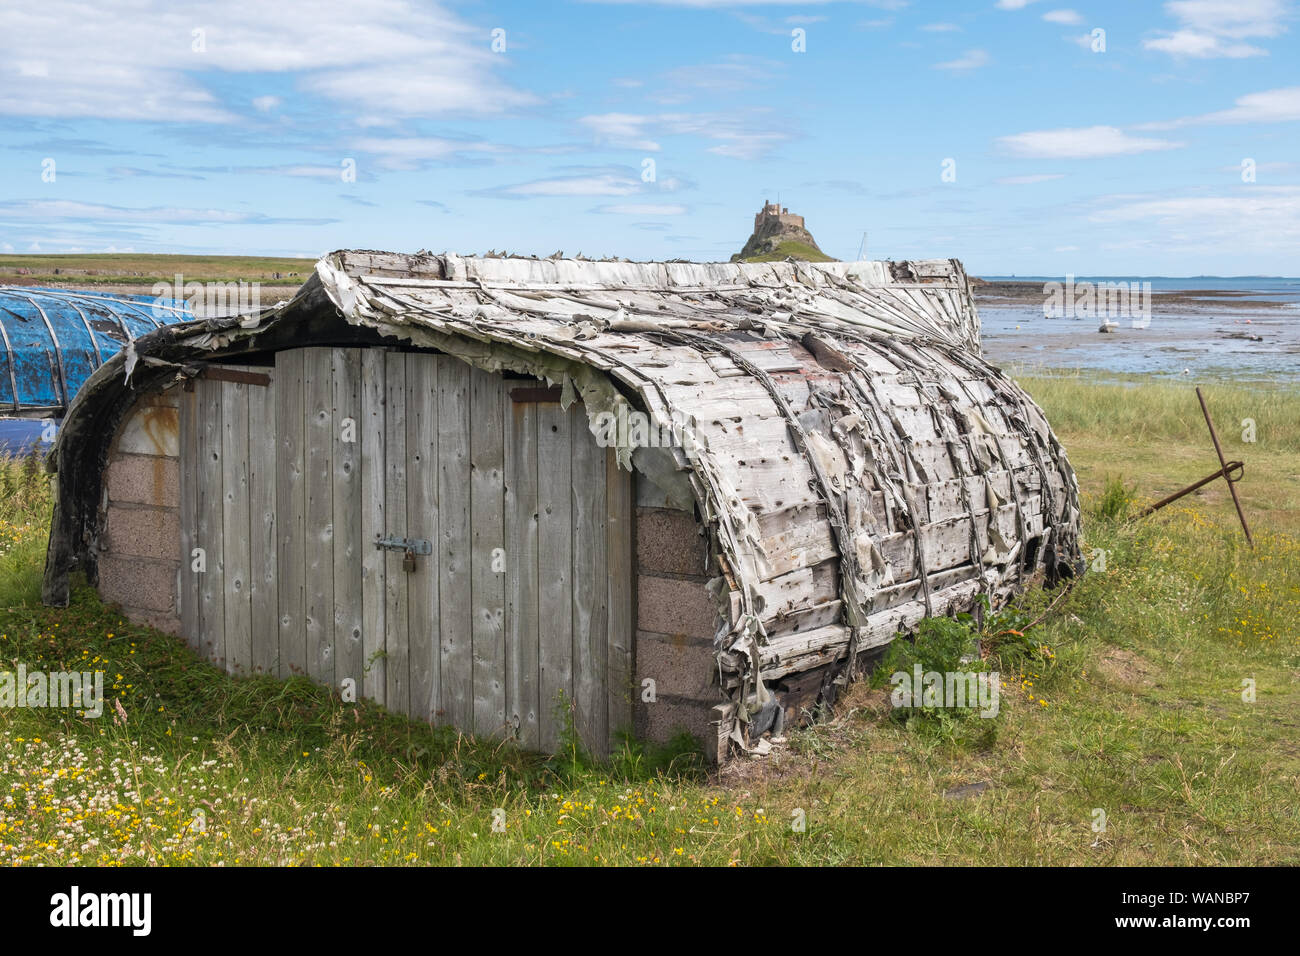 The traditional boat sheds on The Holy Island of Lindisfarne in Northumberland, UK are made from upturned fishing boats Stock Photo